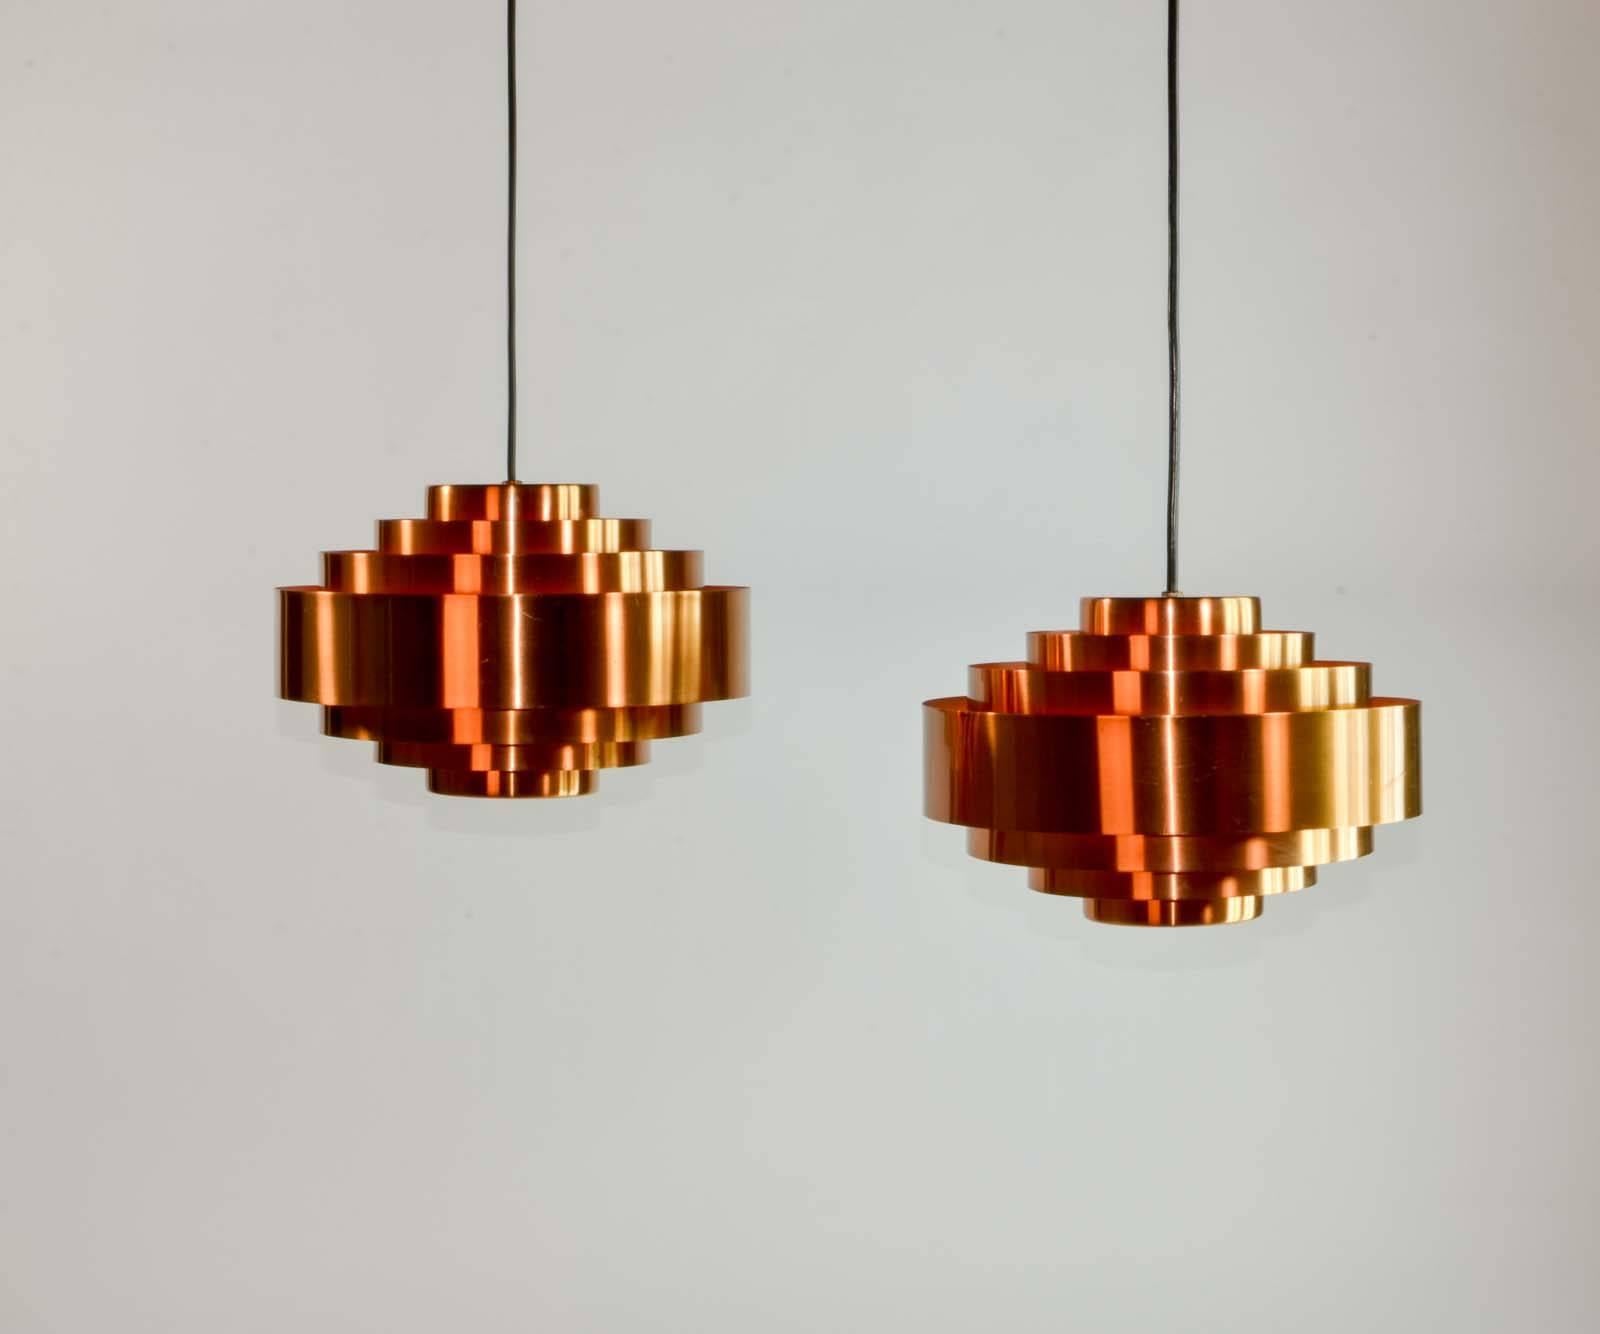 This solid copper pair of 'Ultra' pendants was designed by Jo Hammerborg for Fog & Mørup in the very early 1960s. This version shows an orange inner and consists of seven rings. It is closed towards the top and at the bottom it has a (rare) diffuser